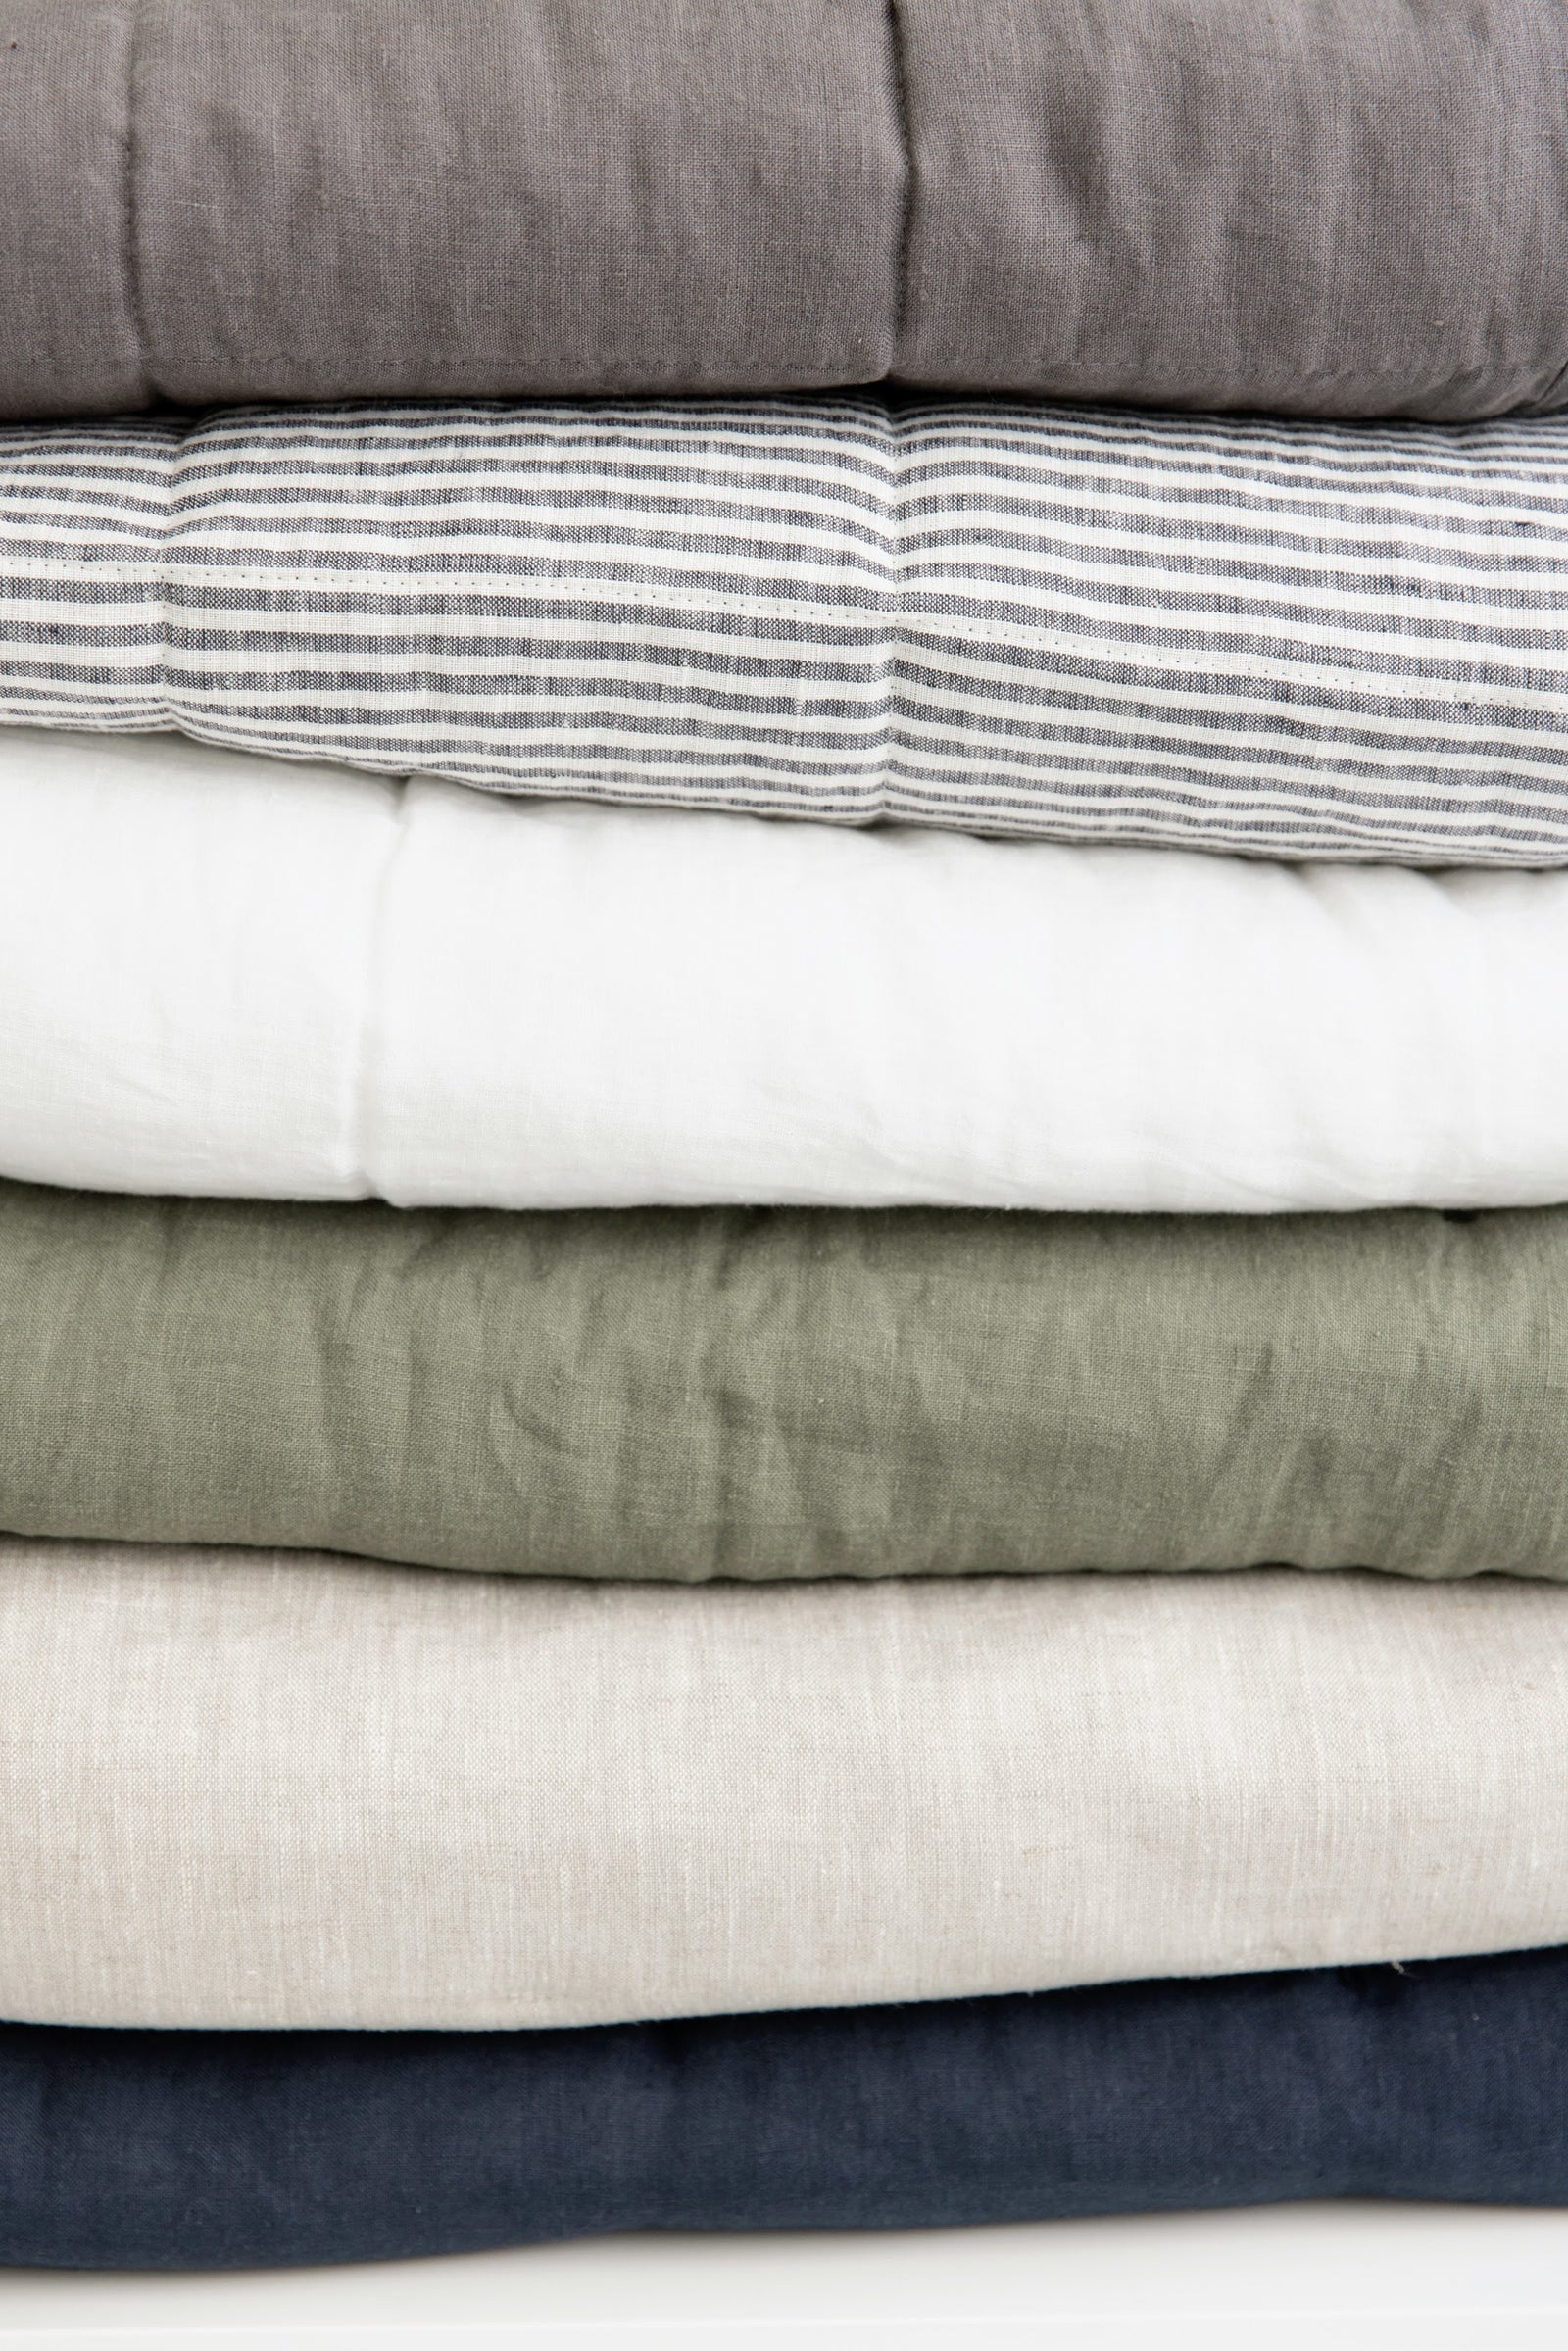 How To Care For Linen